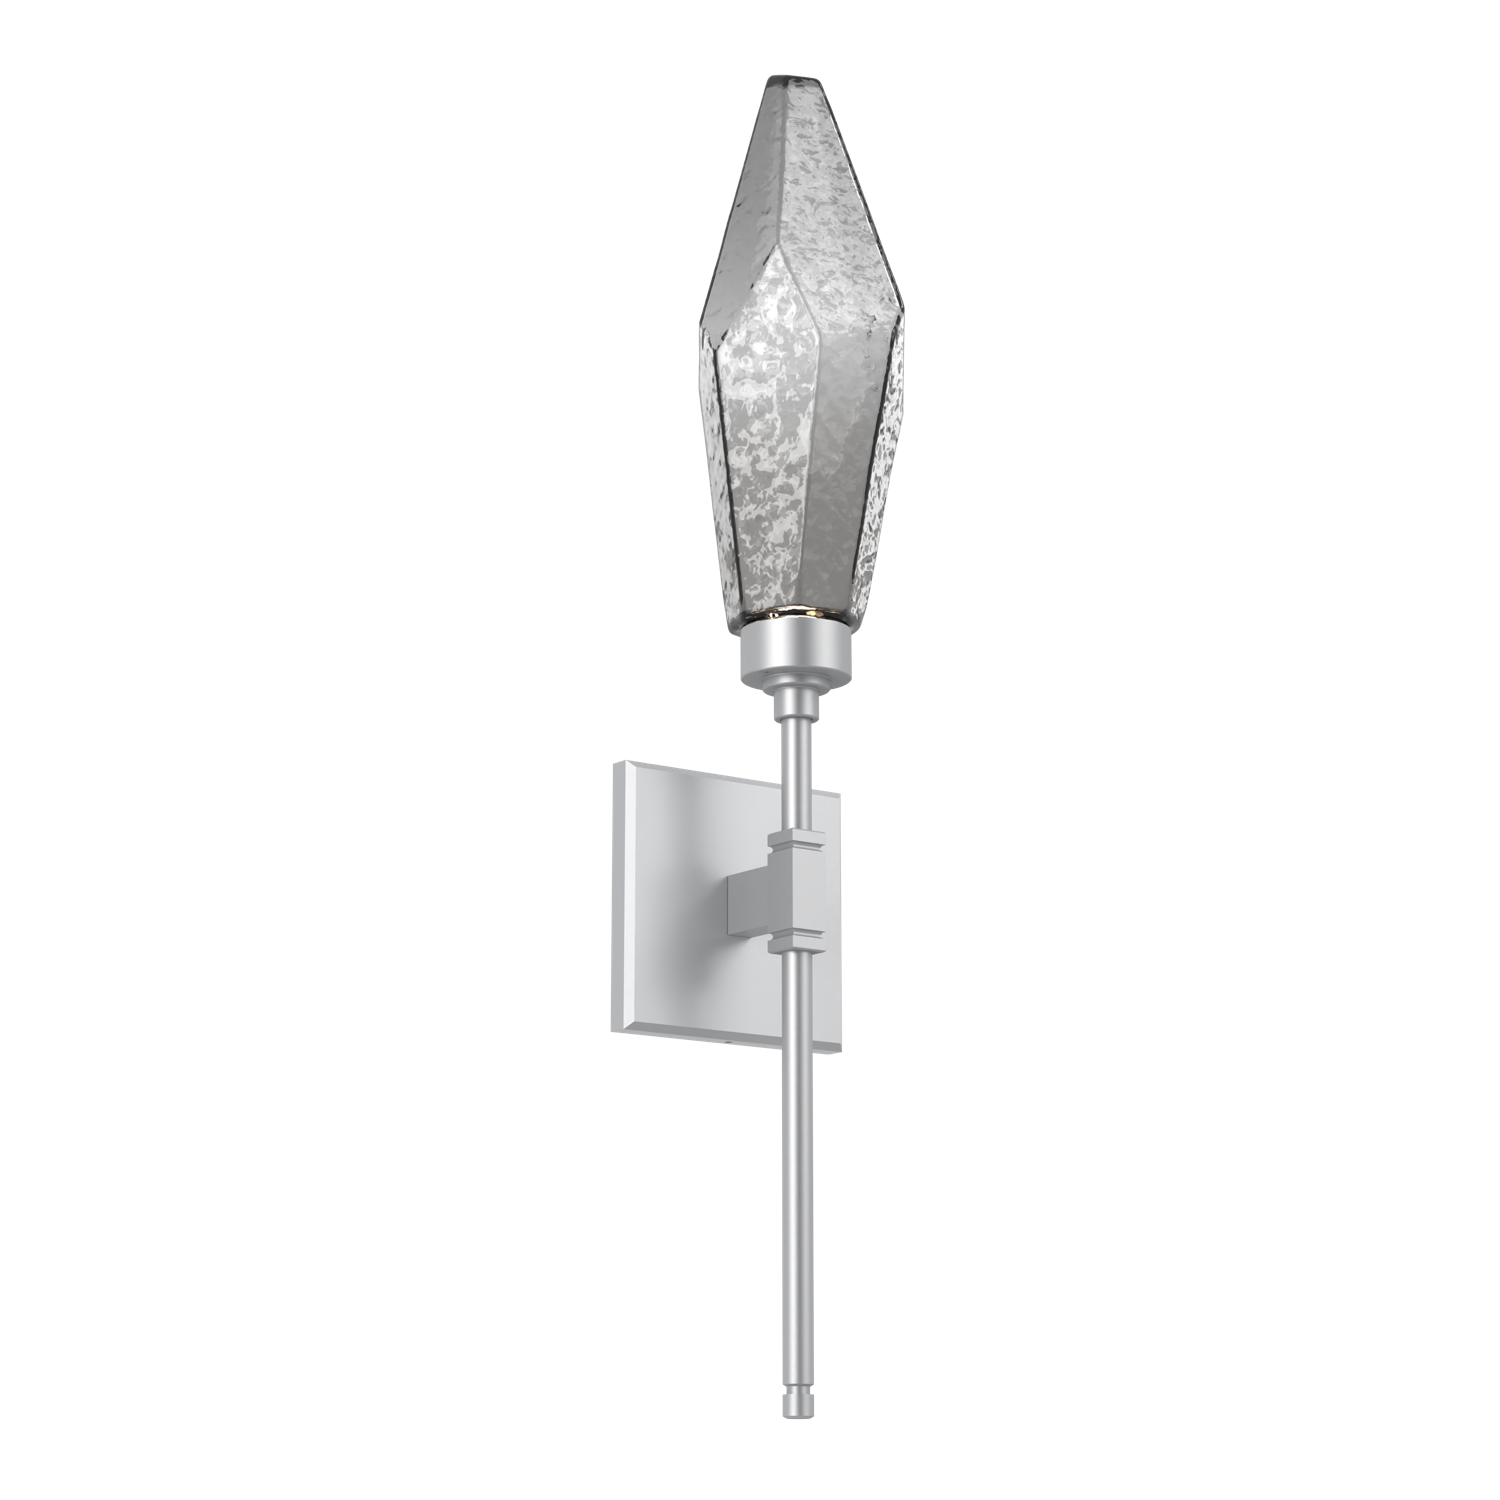 IDB0050-04-CS-CS-Hammerton-Studio-Rock-Crystal-ada-certified-belvedere-wall-sconce-with-classic-silver-finish-and-chilled-smoke-glass-shades-and-LED-lamping